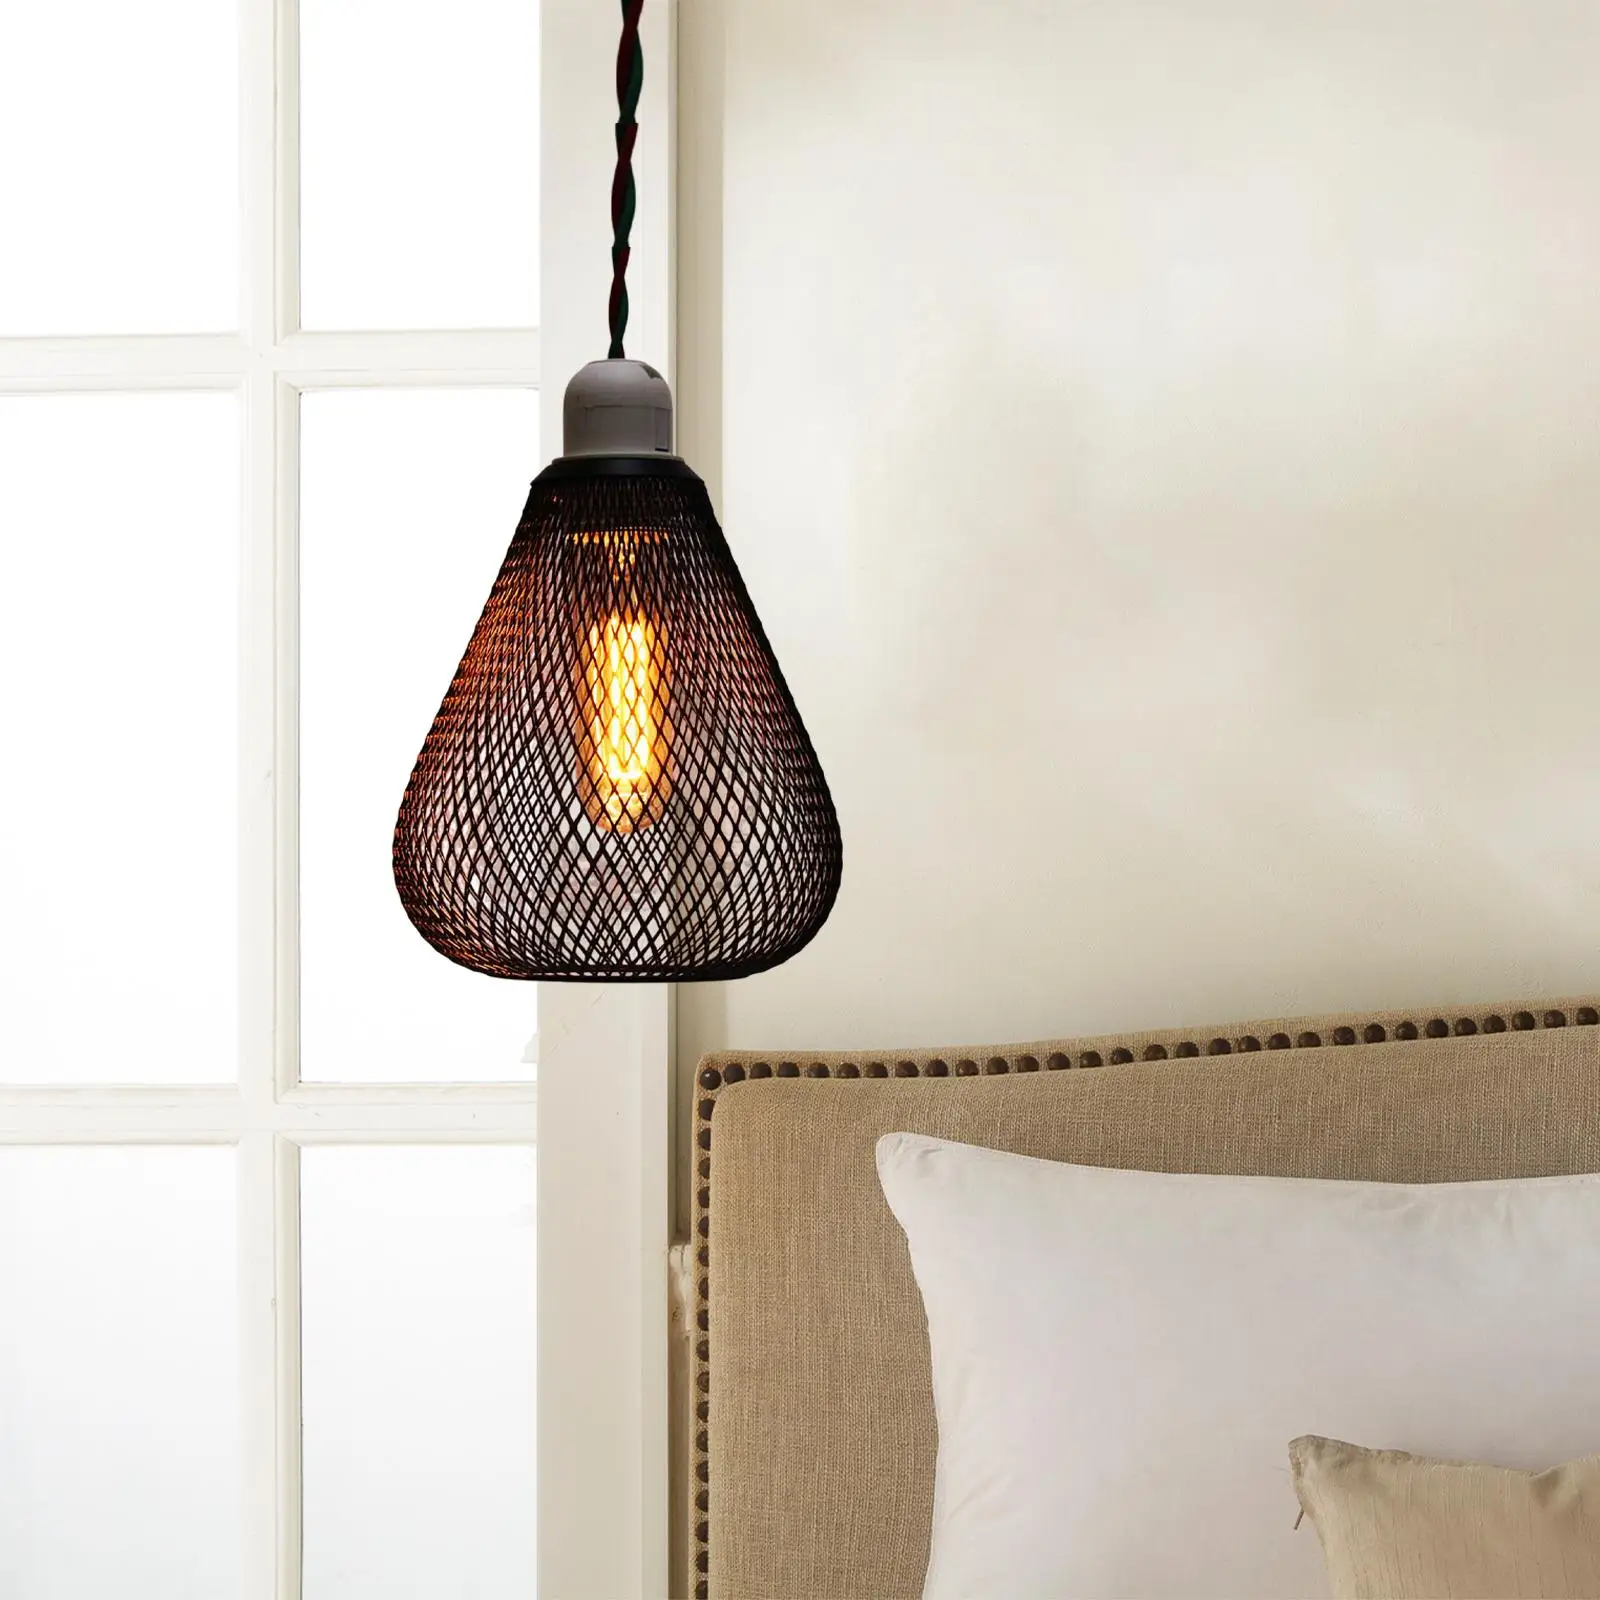 Iron Wire Lampshade Pendant Light Cover Lantern Shade Hanging Light Fixture Chandelier Cover for Cafe